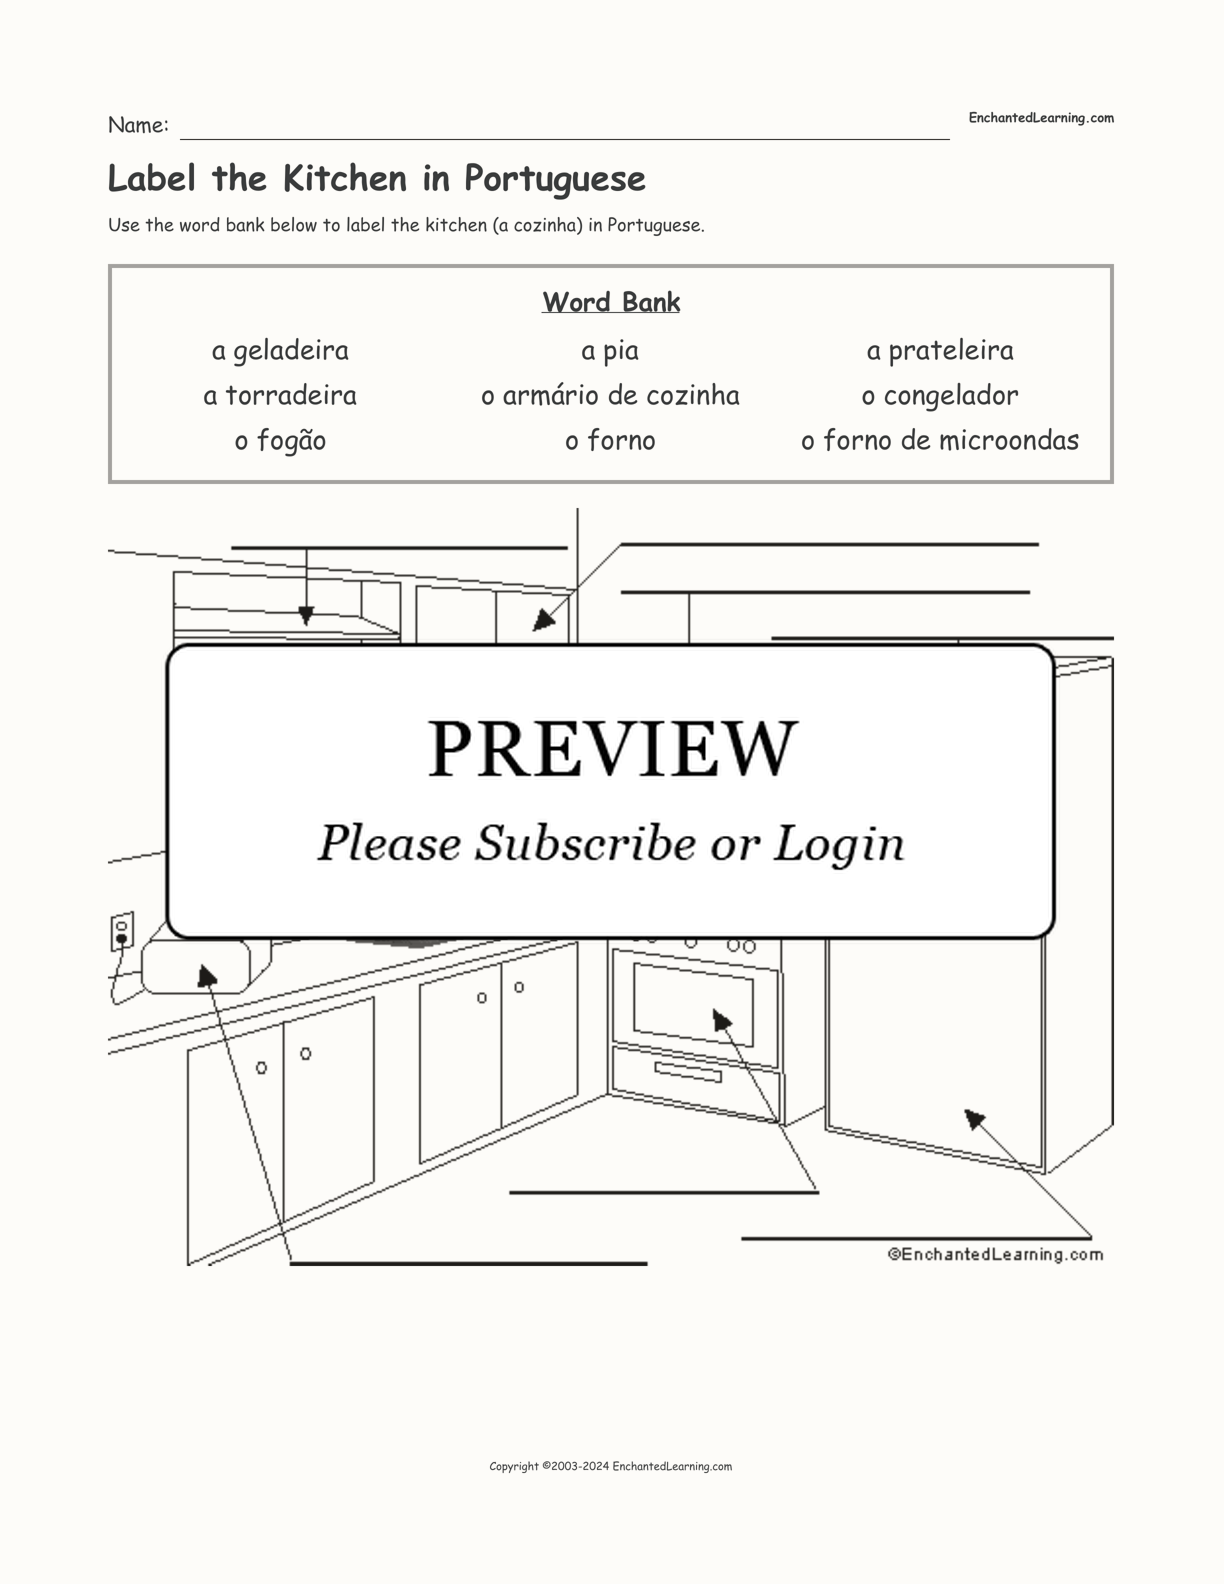 Label the Kitchen in Portuguese interactive worksheet page 1